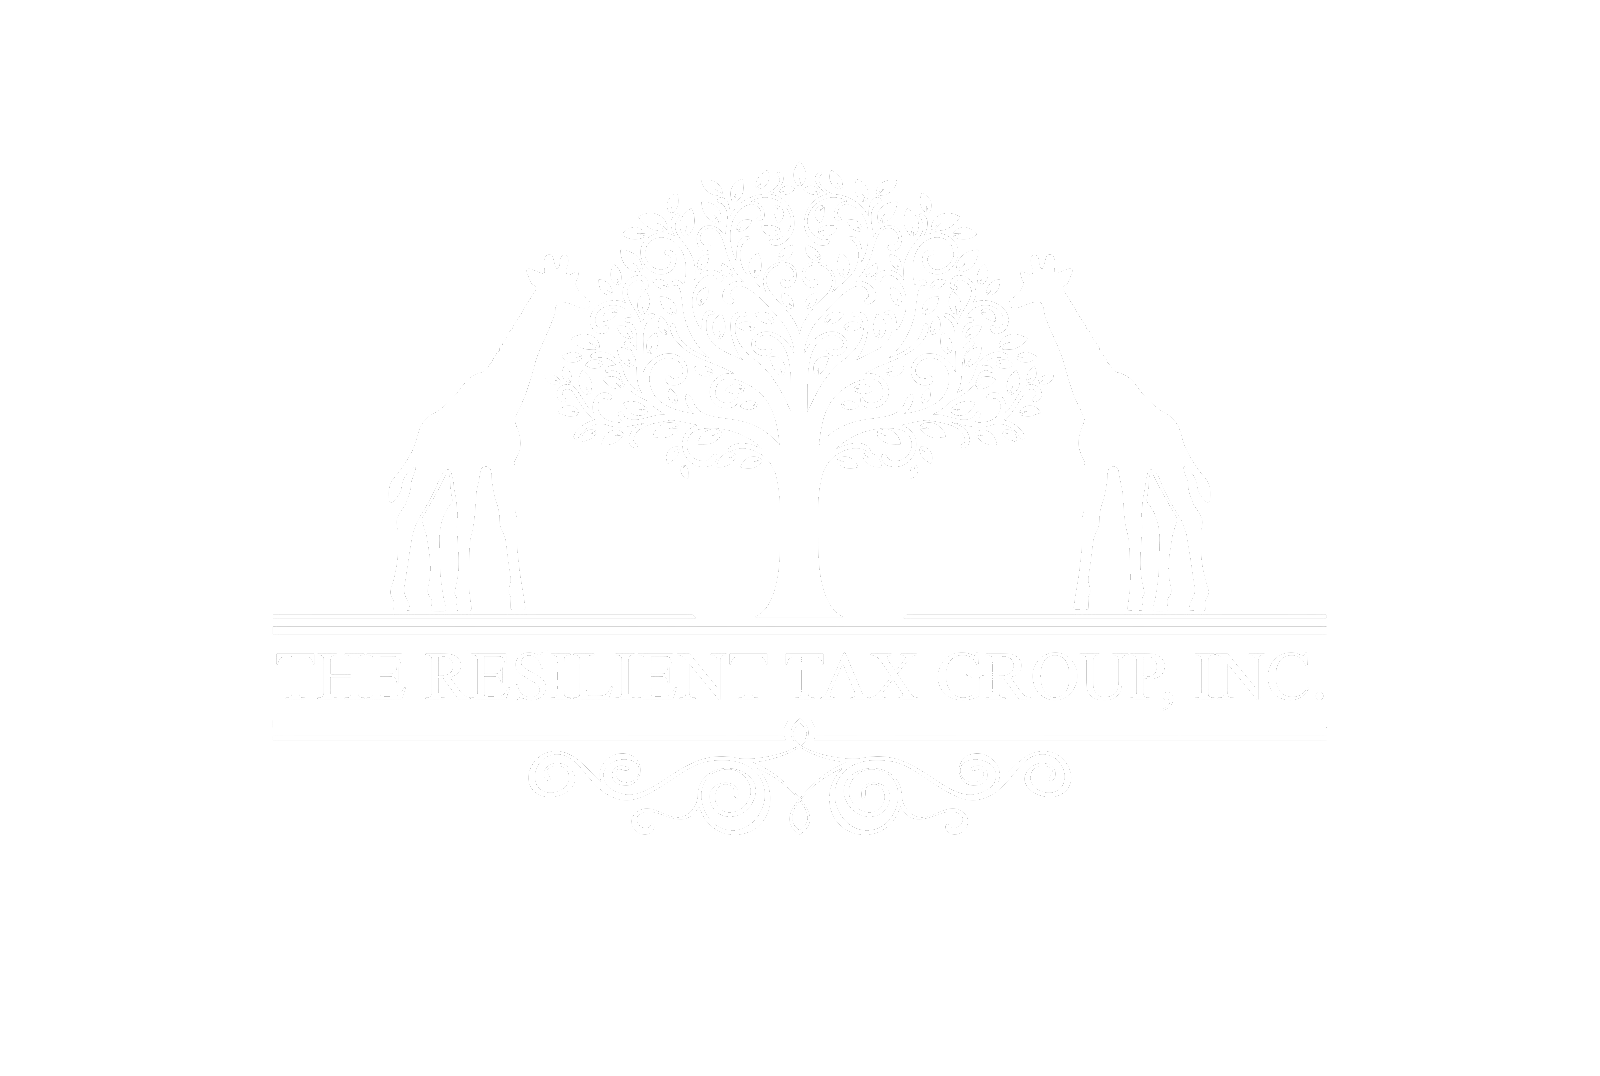 The Resilient Tax Group